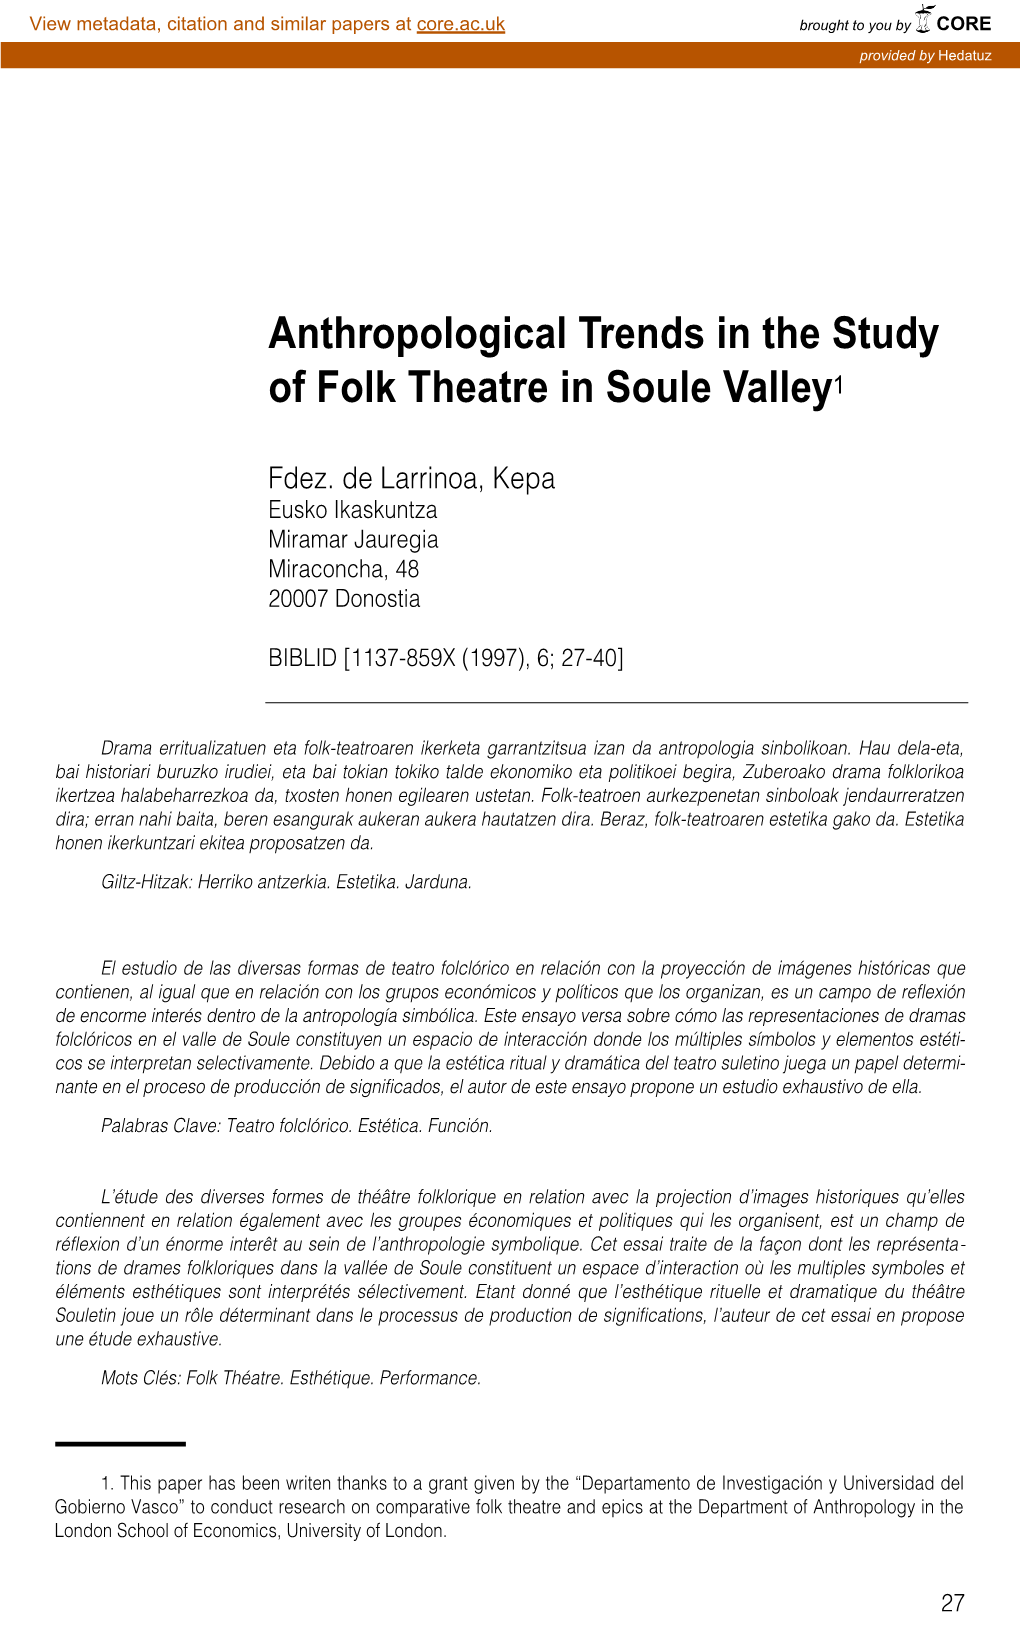 Anthropological Trends in the Study of Folk Theatre in Soule Valley1